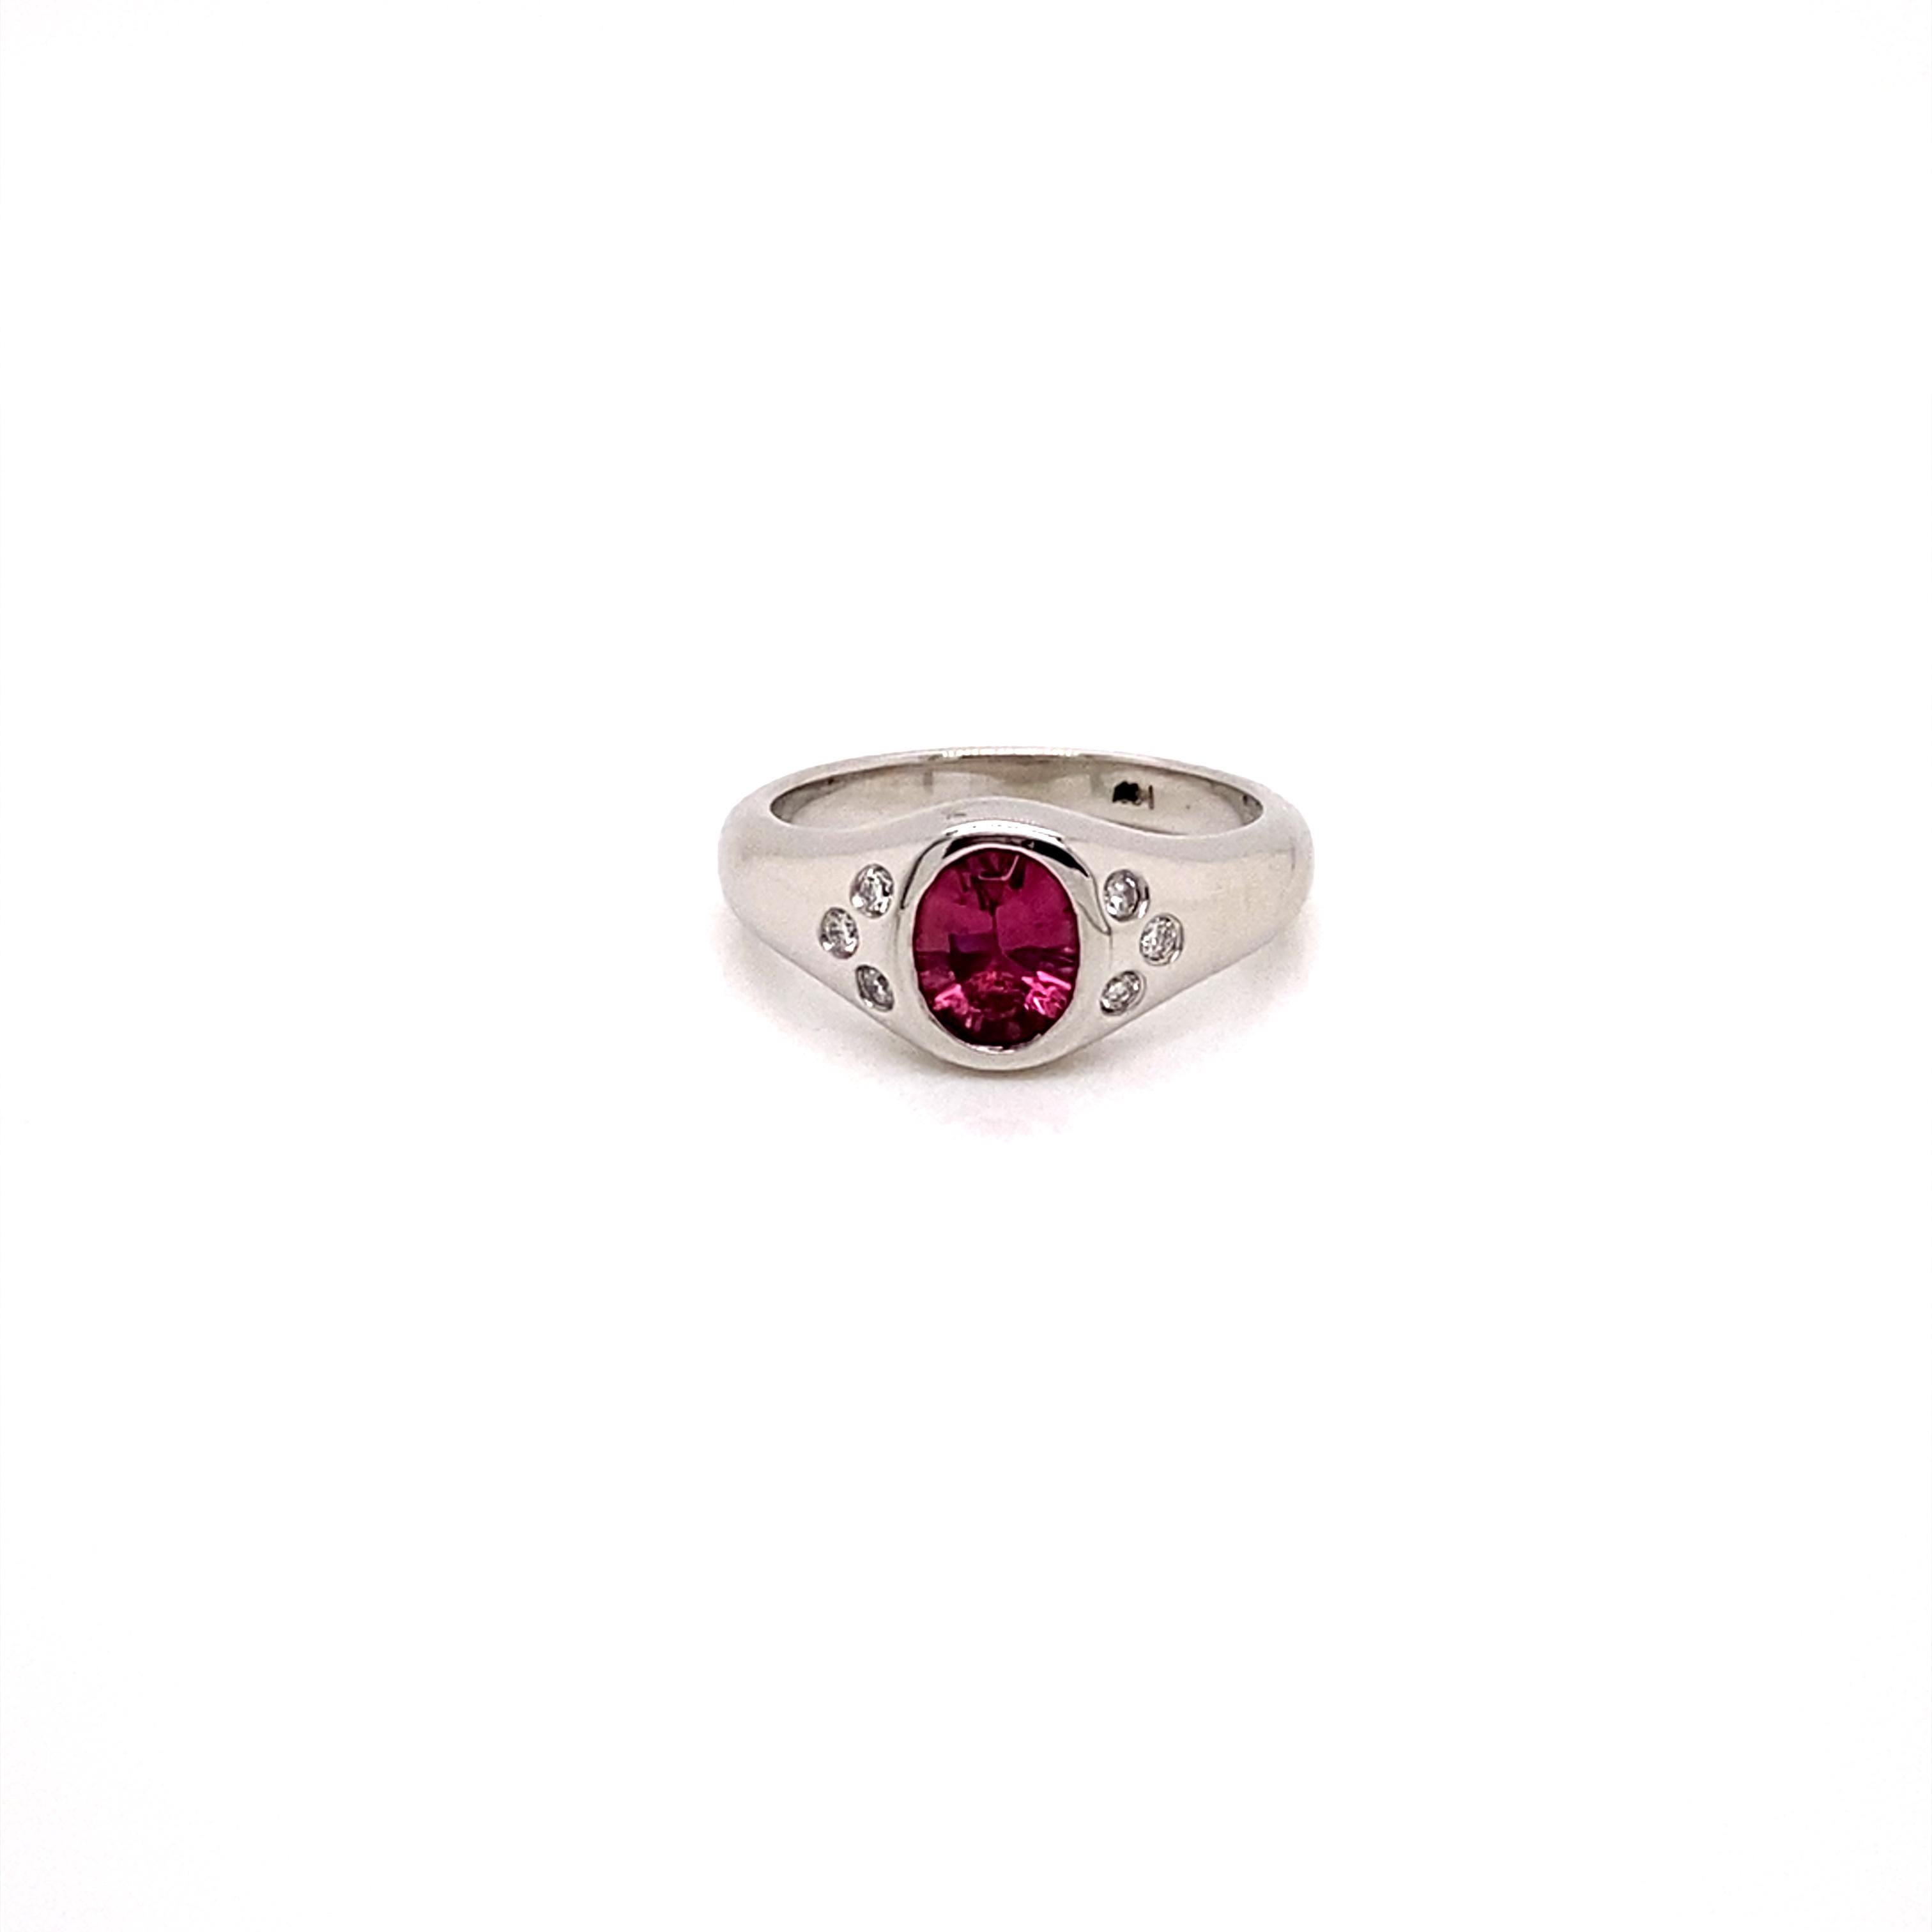 This stunning white gold pink tourmaline and diamond ring is a modern update on the classic signet pinky ring.

Featuring a beautiful pink hued oval tourmaline and 6 sparkling white diamonds all bezel set in a high polished 14k white gold setting,